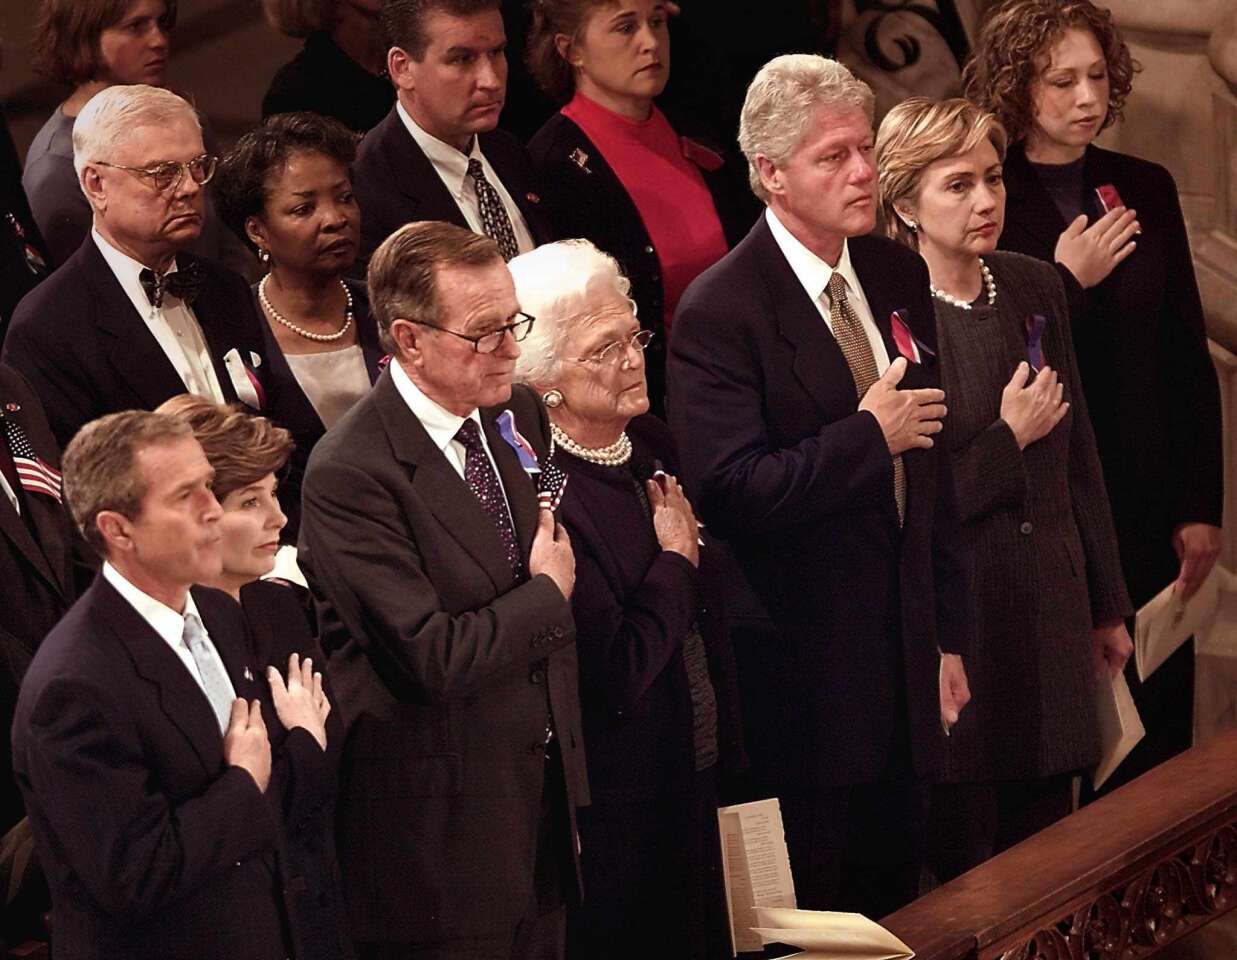 From left: George W. Bush, Laura Bush, George H.W. Bush, Barbara Bush, Bill Clinton, Hillary Clinton and Chelsea Clinton during the presentation of the colors at the National Day of Prayer and Remembrance Service in 2001 at the National Cathedral in Washington.